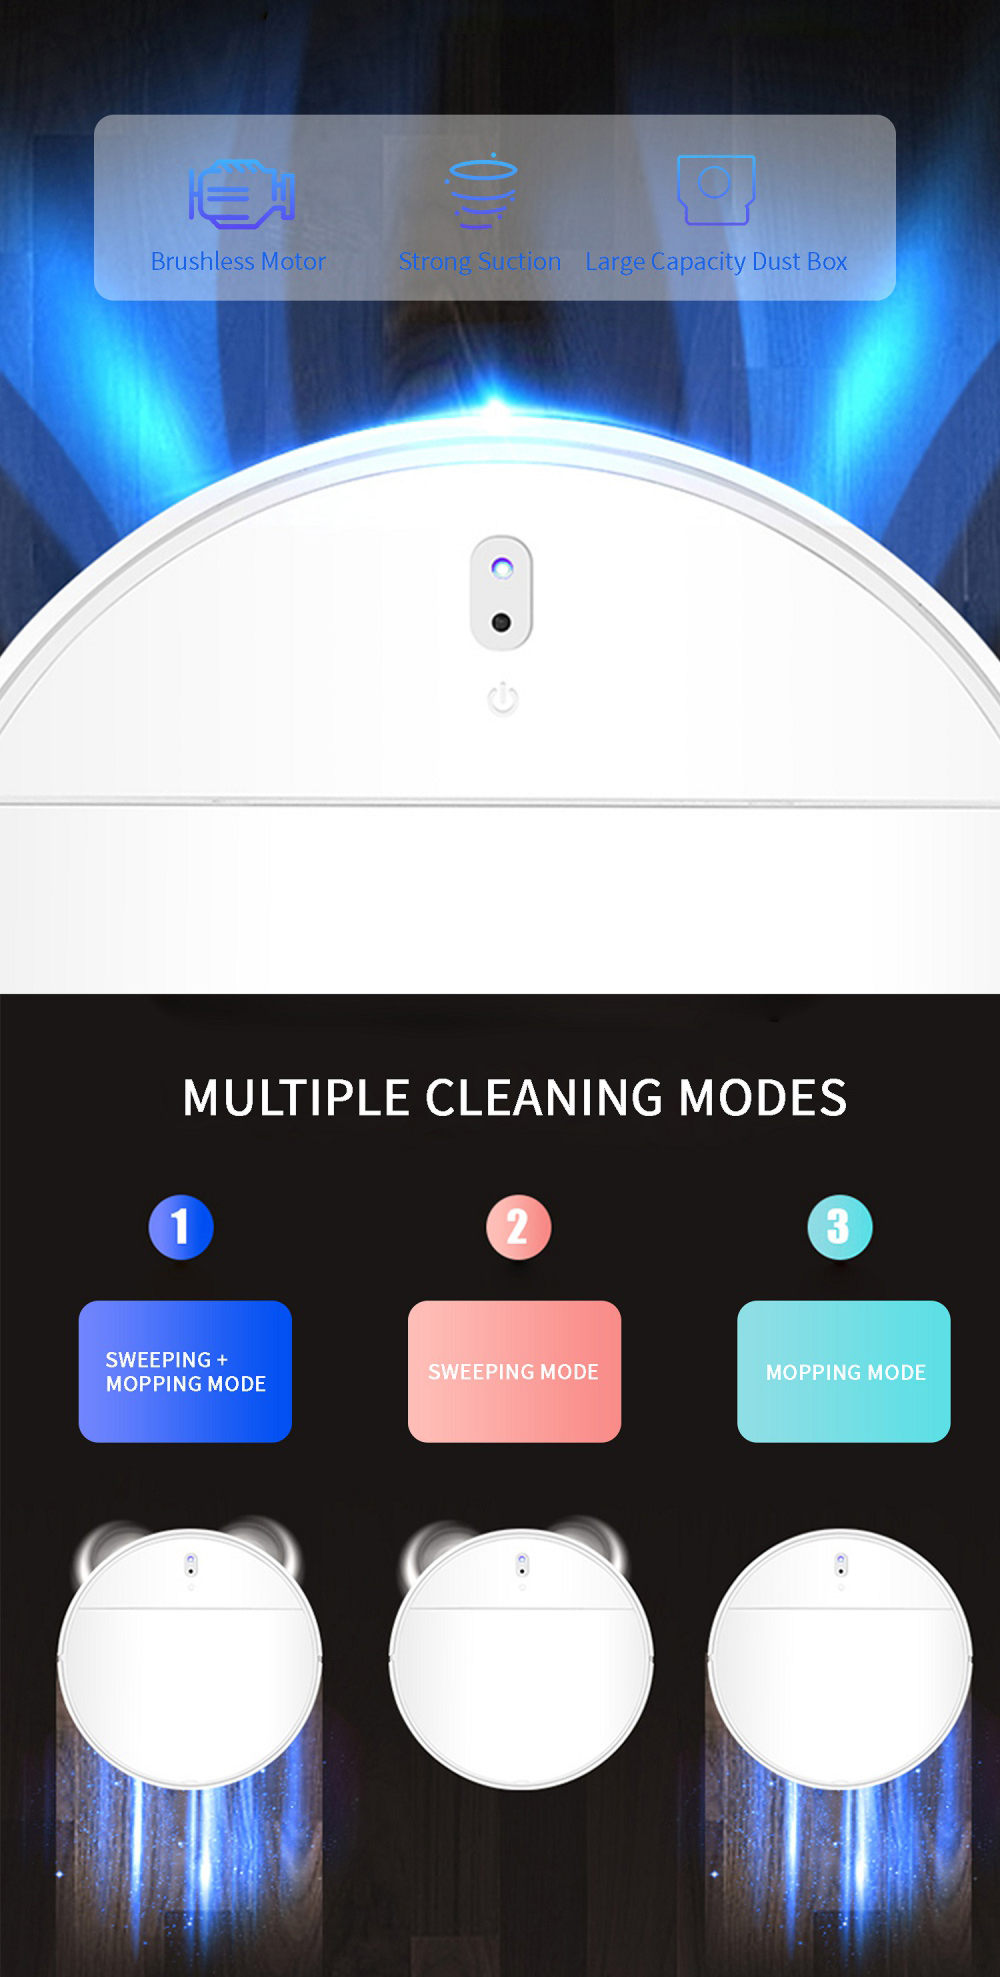 Laser-Navigation-Robot-Vacuum-Cleaner-Smart-Touch-Control-3-Cleaning-Modes-Automatic-Dry-Wet-Sweepin-1765735-2